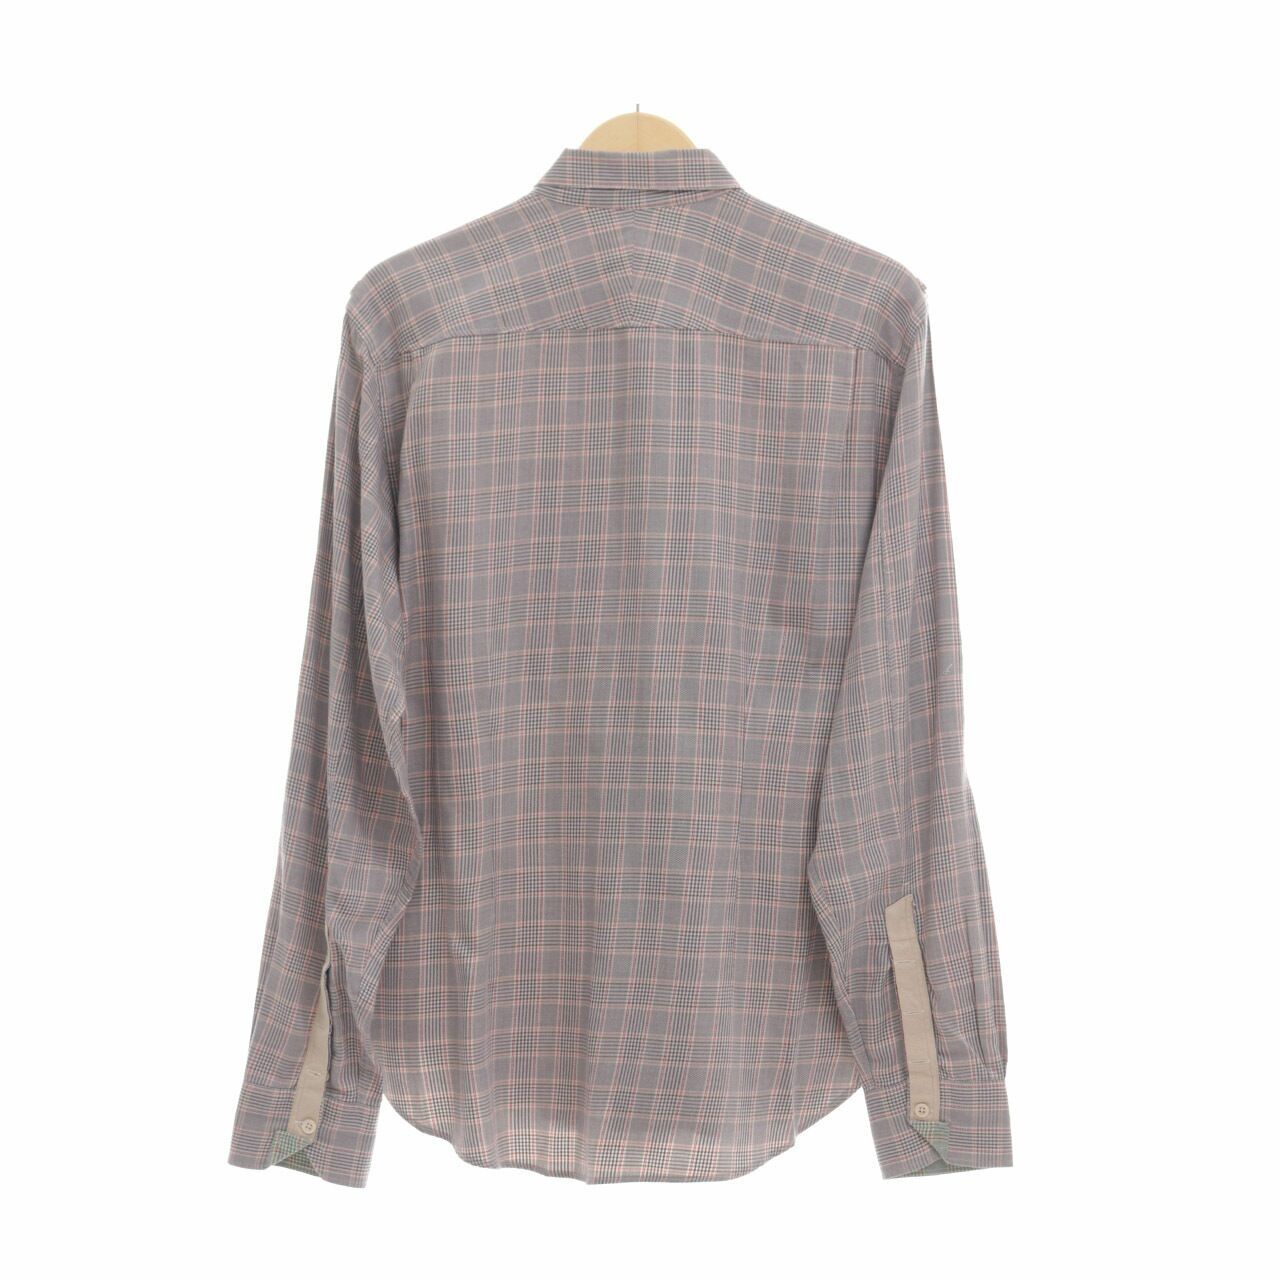 Paul Smith Multicolor Houndstooth Shirt